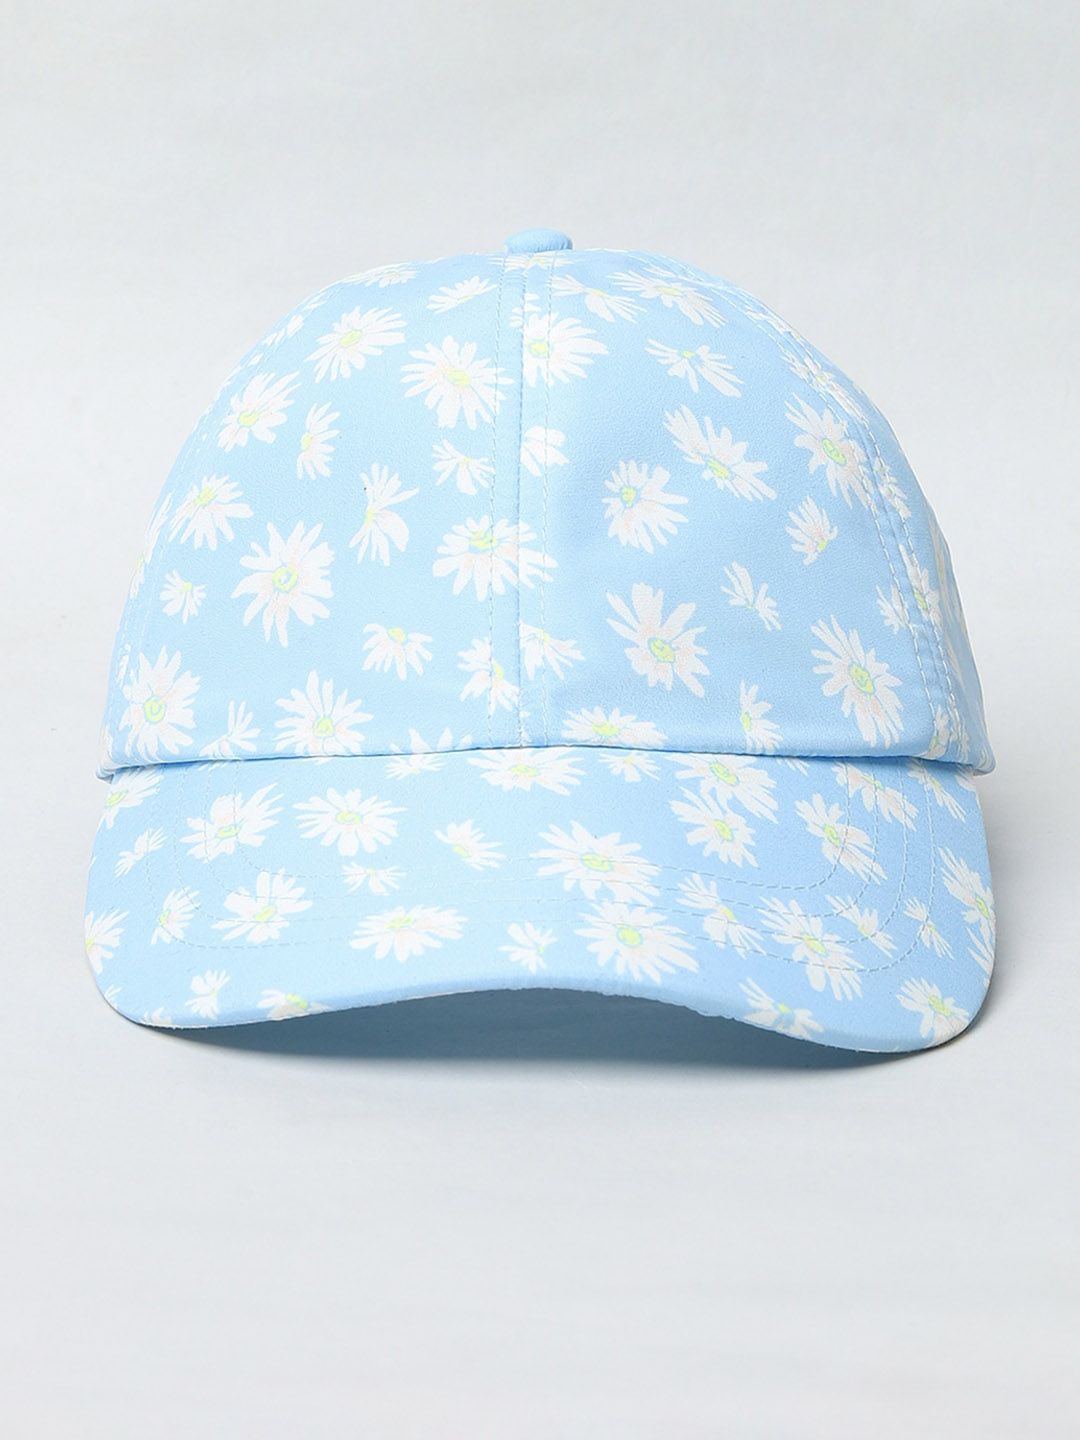 ONLY Women Blue & White Printed Baseball Cap Price in India